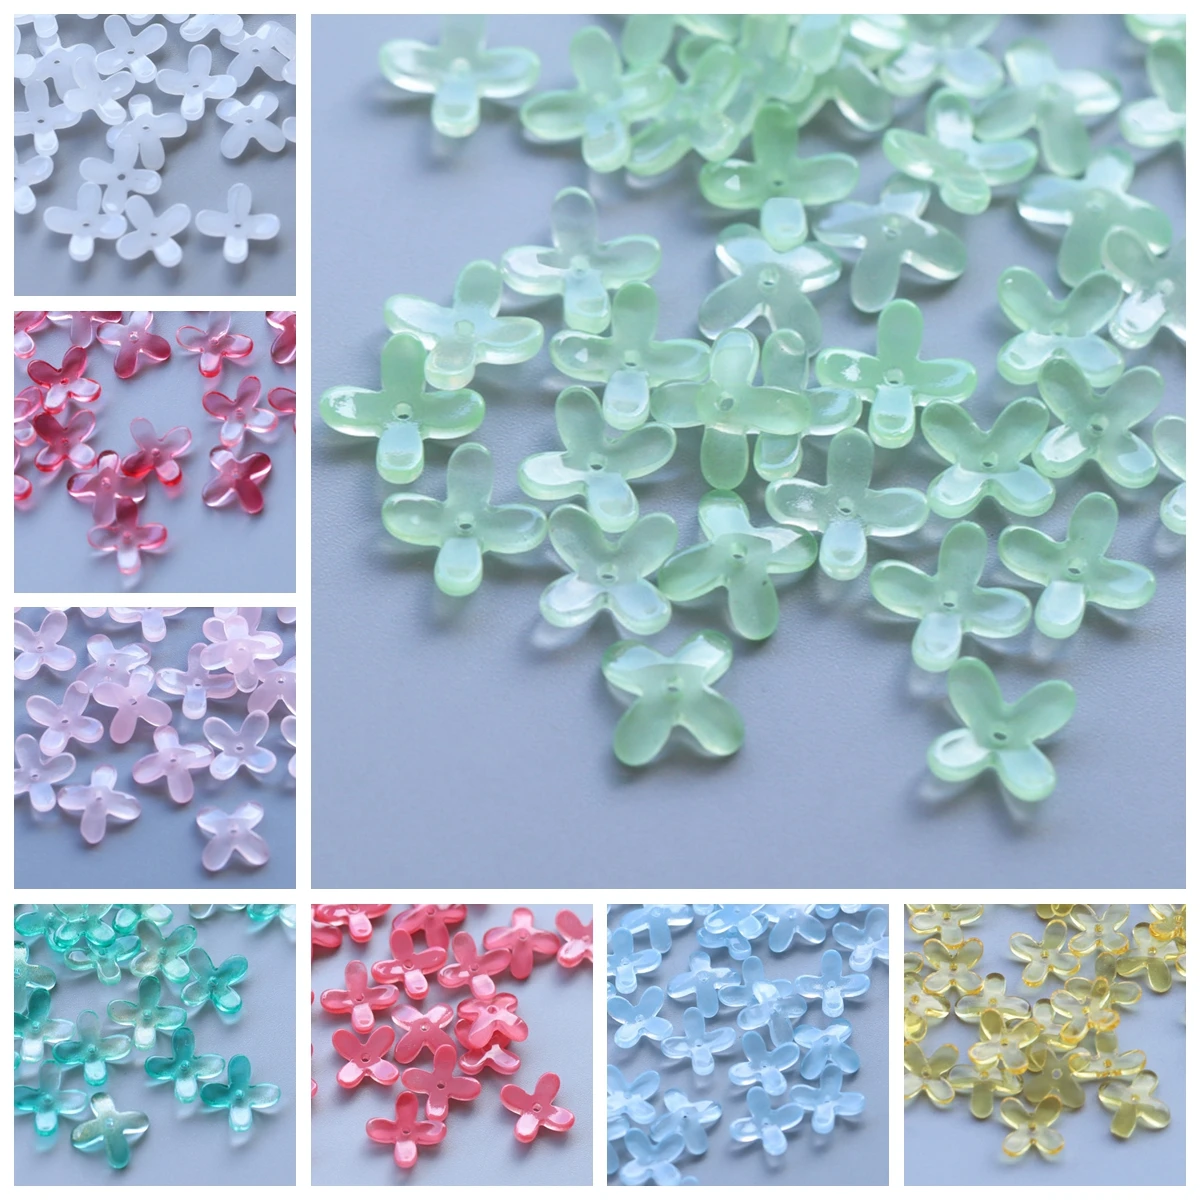 20pcs Cross Flower Shape 12mm Lampwork Crystal Glass Loose Beads Lot For Jewelry Making DIY Crafts Findings 10pcs round 6mm 8mm 10mm 12mm no luminous handmade lampwork glass loose beads for jewelry making diy crafts findings